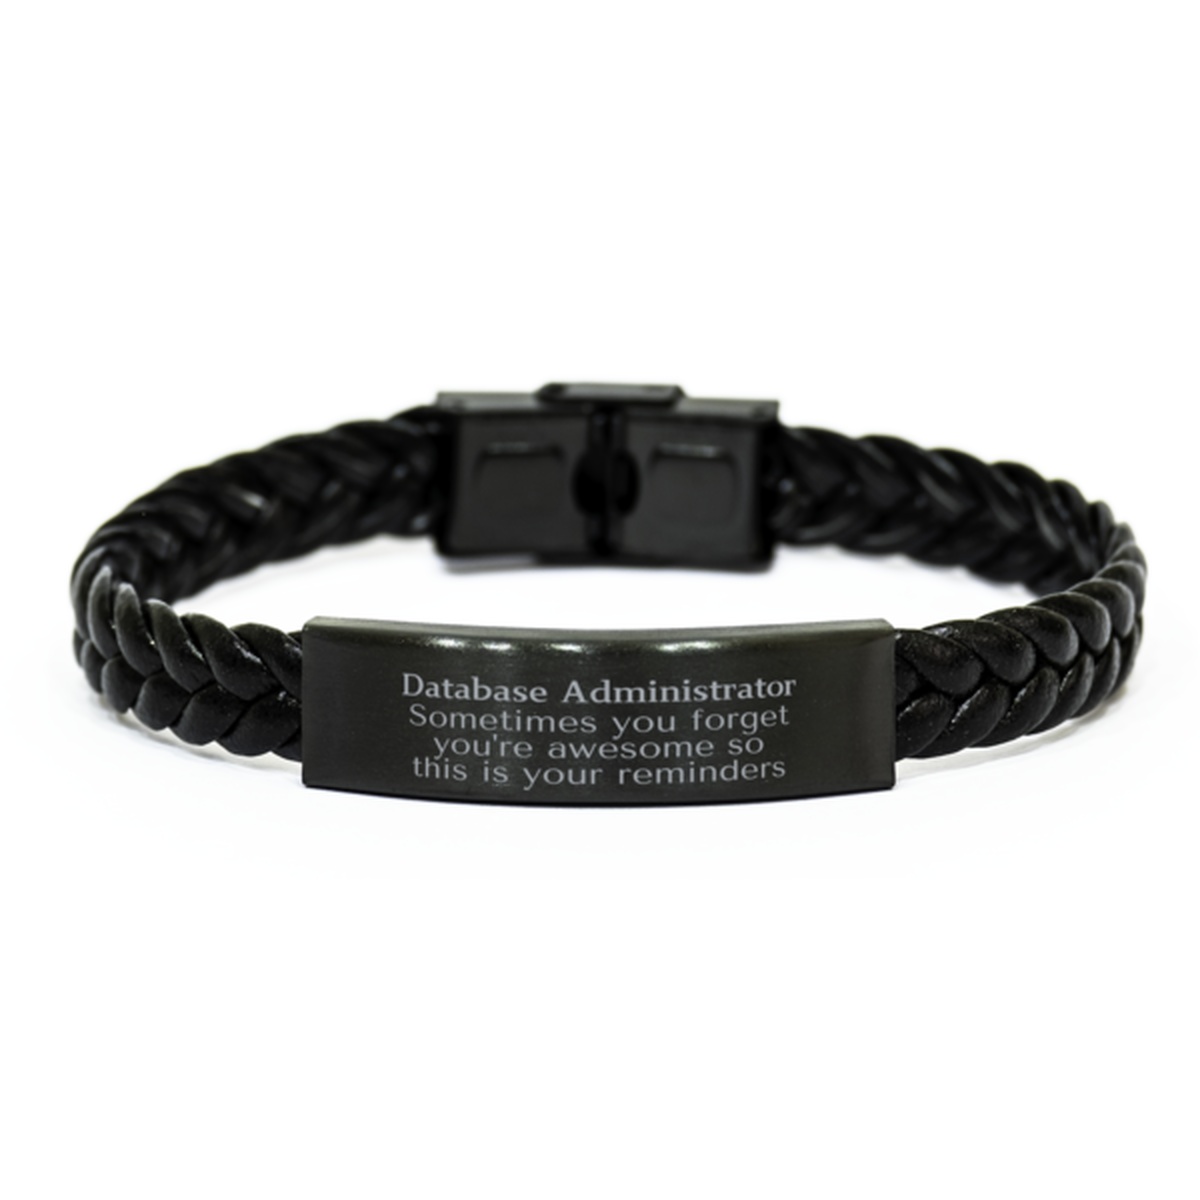 Sentimental Database Administrator Braided Leather Bracelet, Database Administrator Sometimes you forget you're awesome so this is your reminders, Graduation Christmas Birthday Gifts for Database Administrator, Men, Women, Coworkers